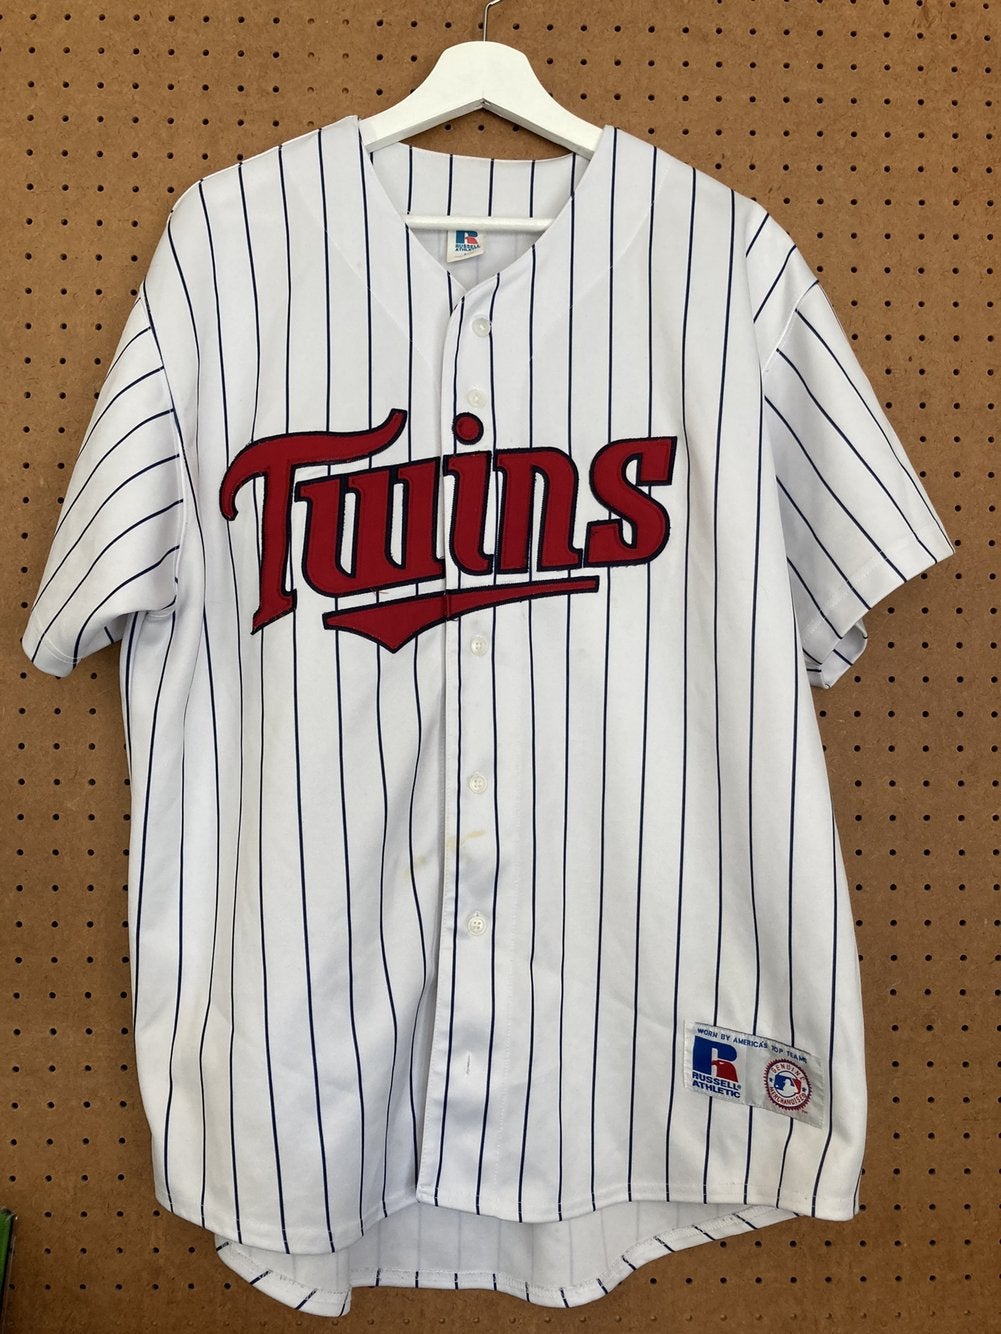 Russell Athletic Throwback MLB & NFL Jerseys & Vintage Gear